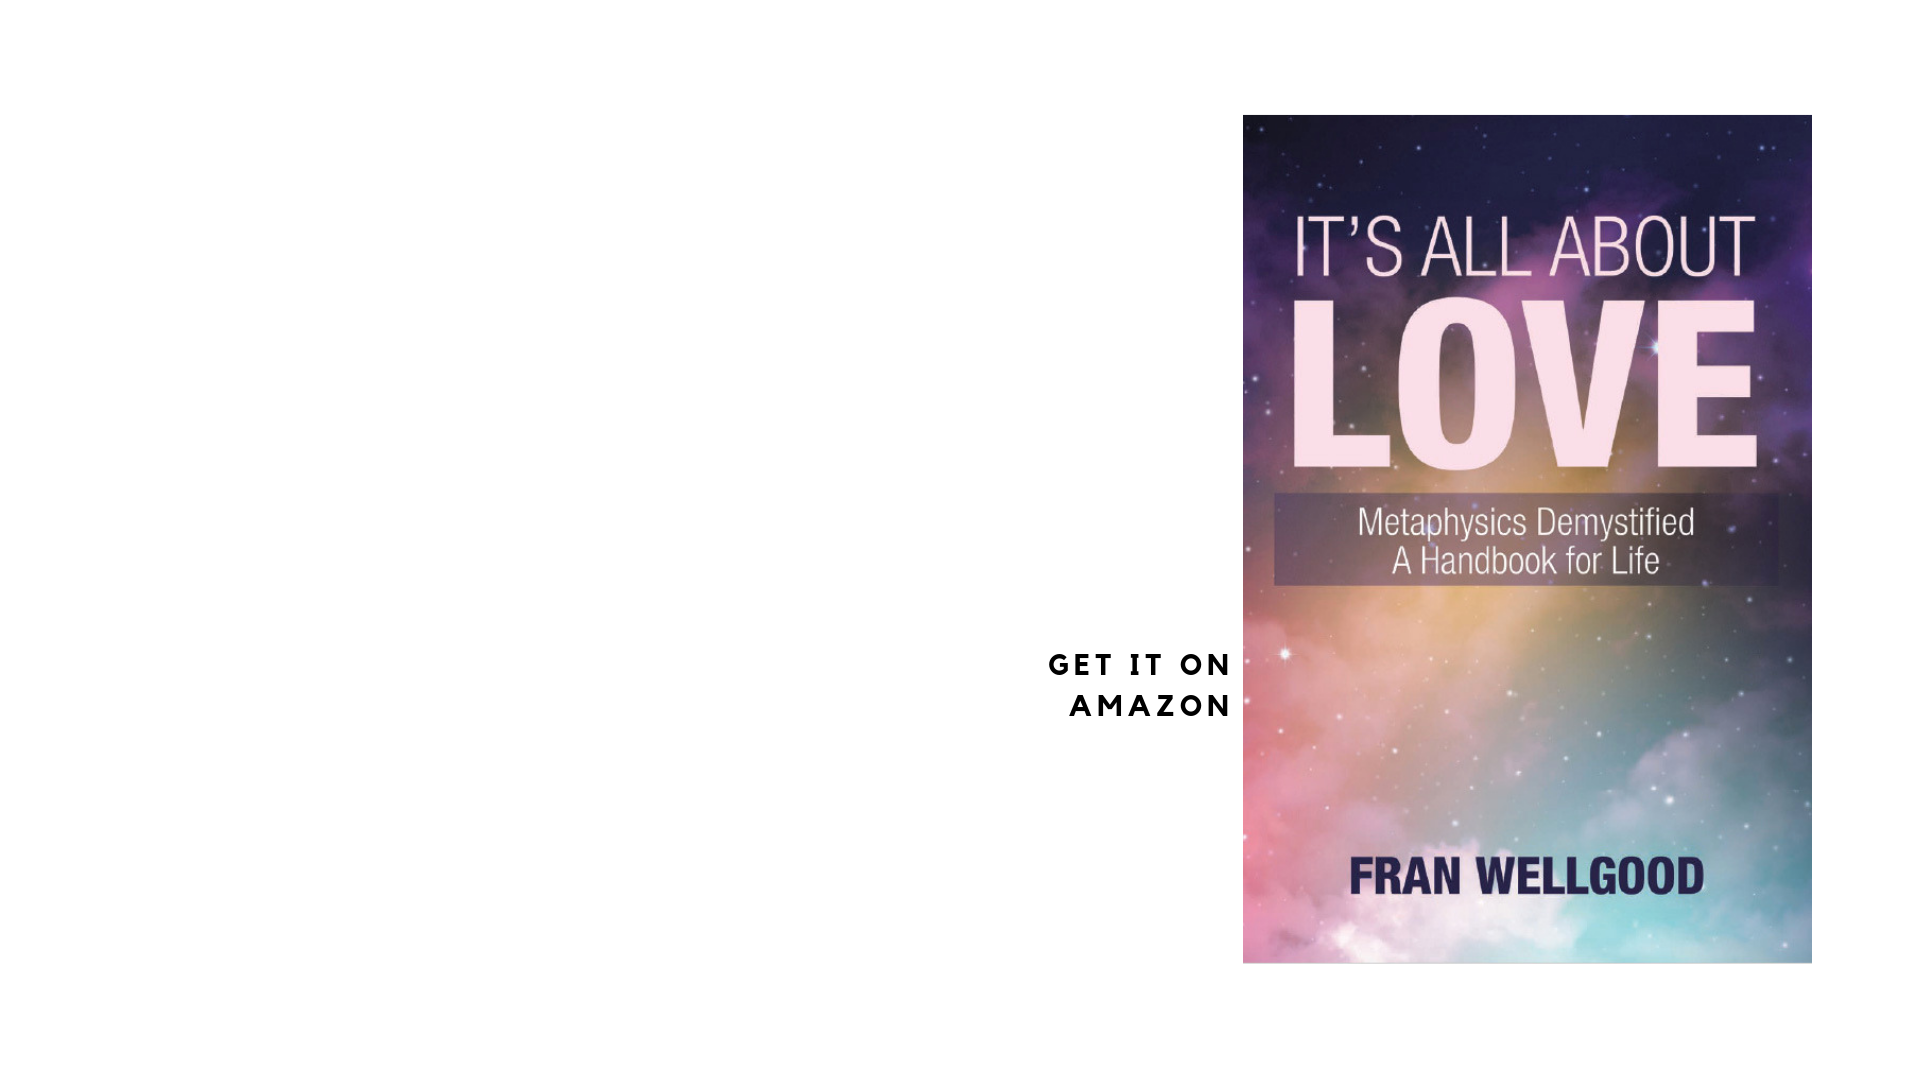 Book Launch: It's All About Love: Metaphysics Demystified, A Handbook for Life by Fran Wellgood